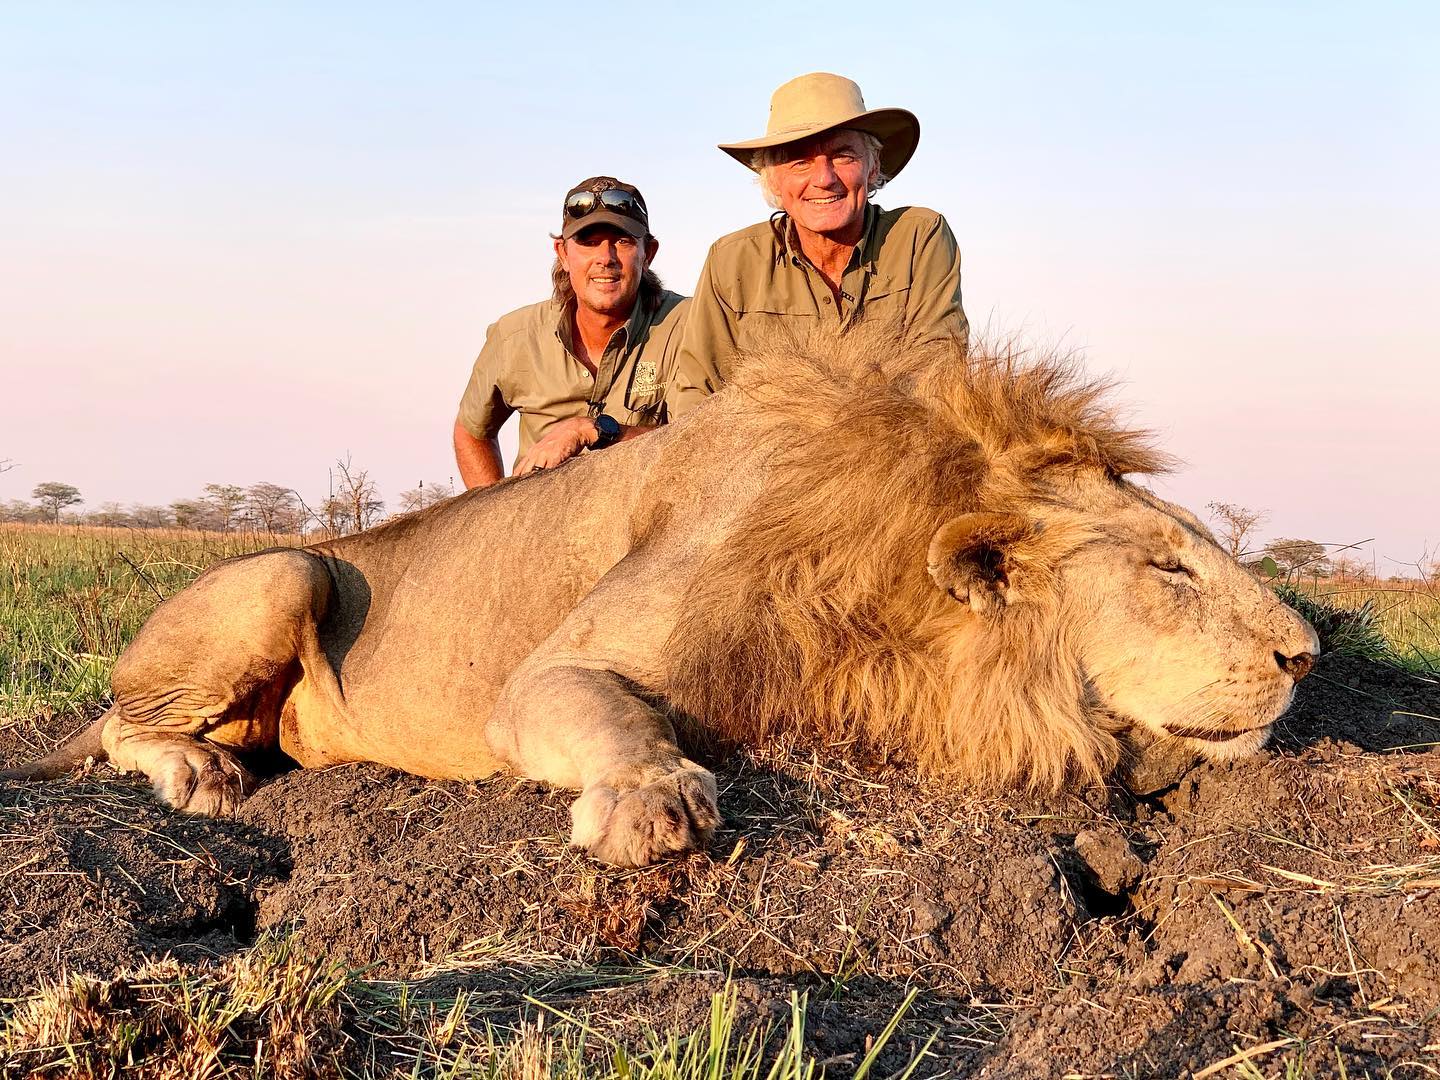 How much does African countries make for wildlife Trophy hunting